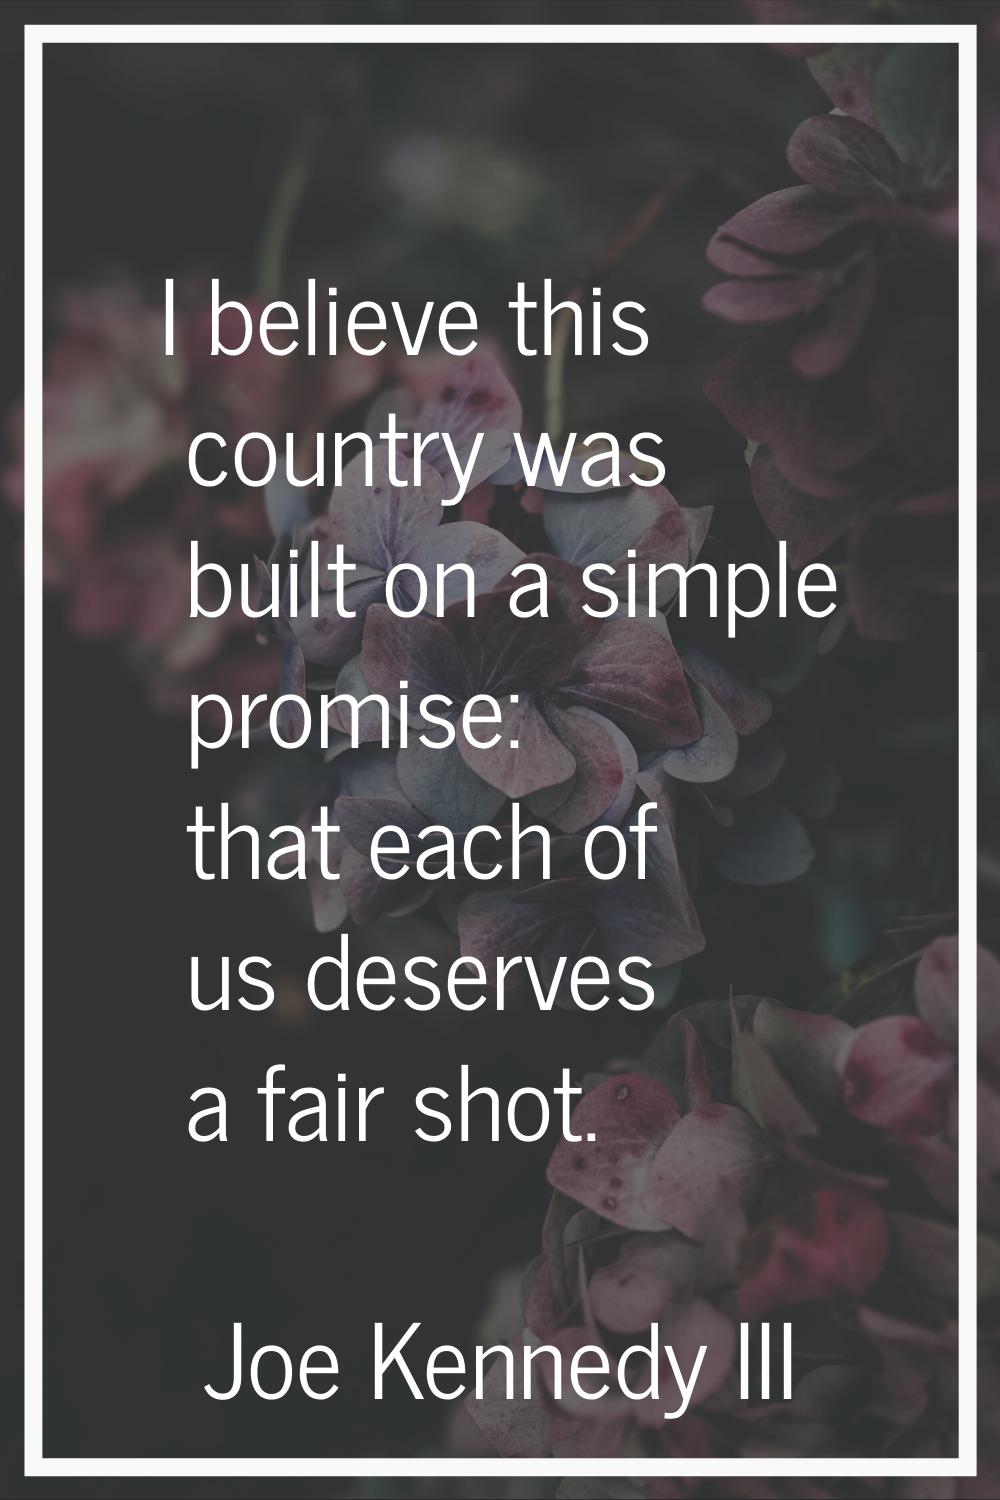 I believe this country was built on a simple promise: that each of us deserves a fair shot.